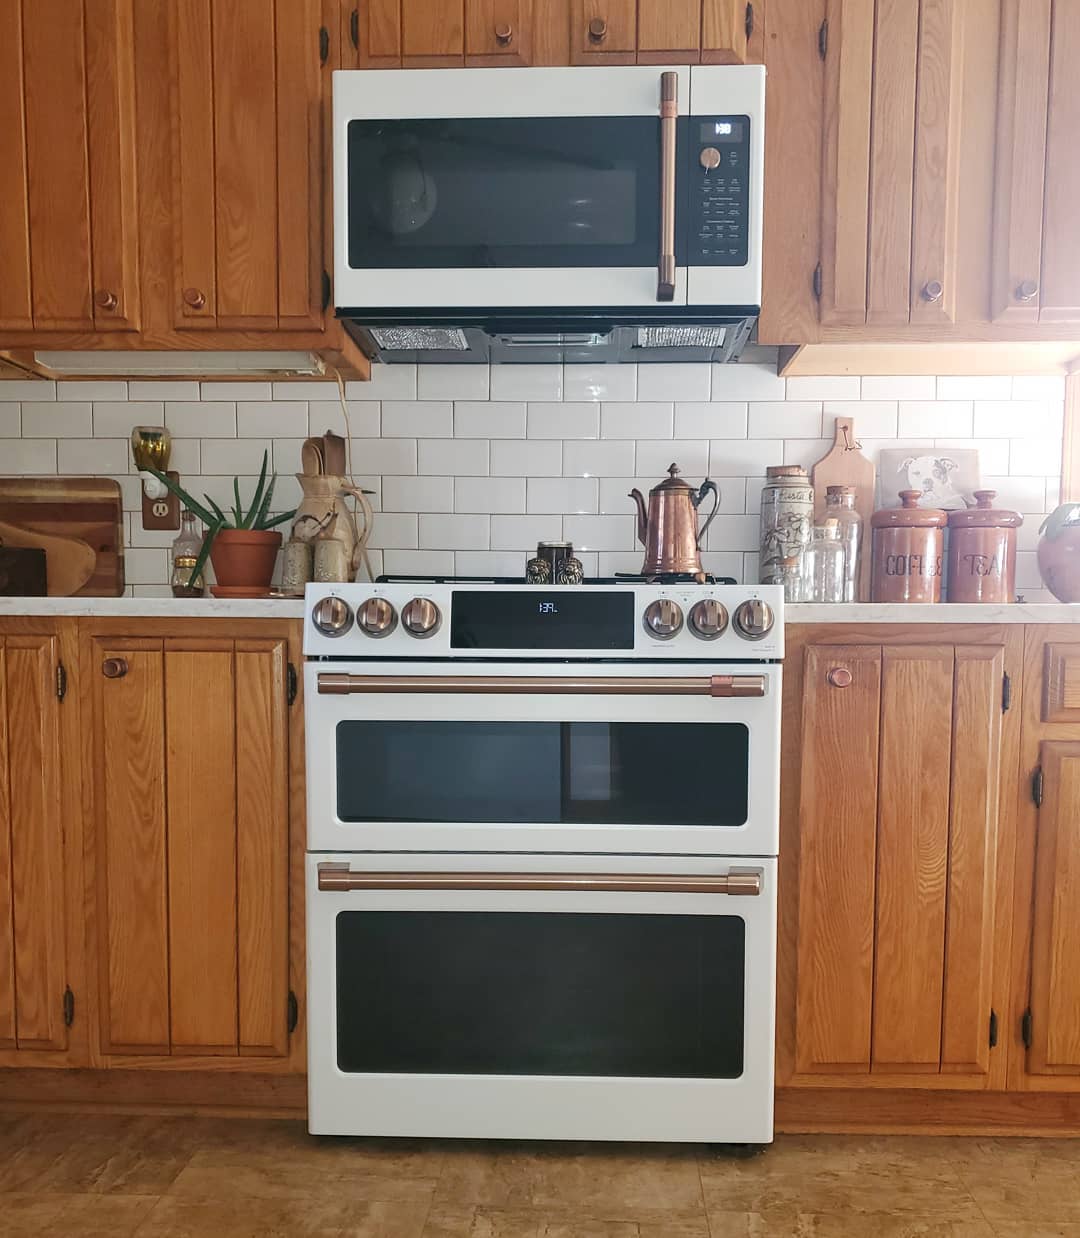 Updated Appliances in Older Kitchen with Energy Efficient Microwave. Photo by Instagram user @nickalena__